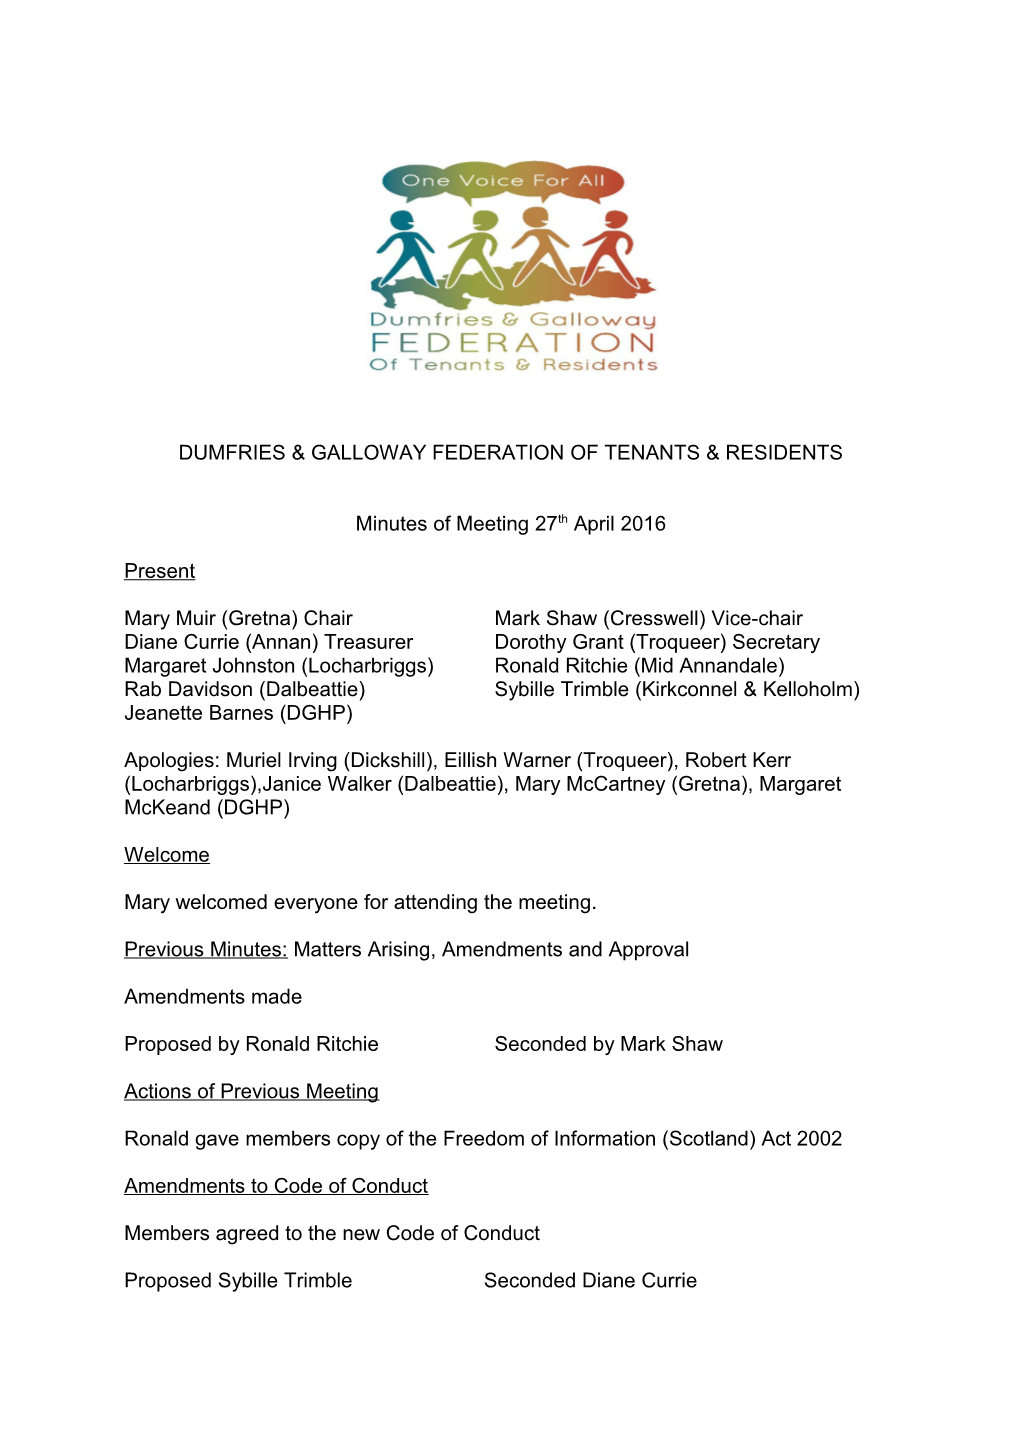 Dumfries & Galloway Federation of Tenants & Residents